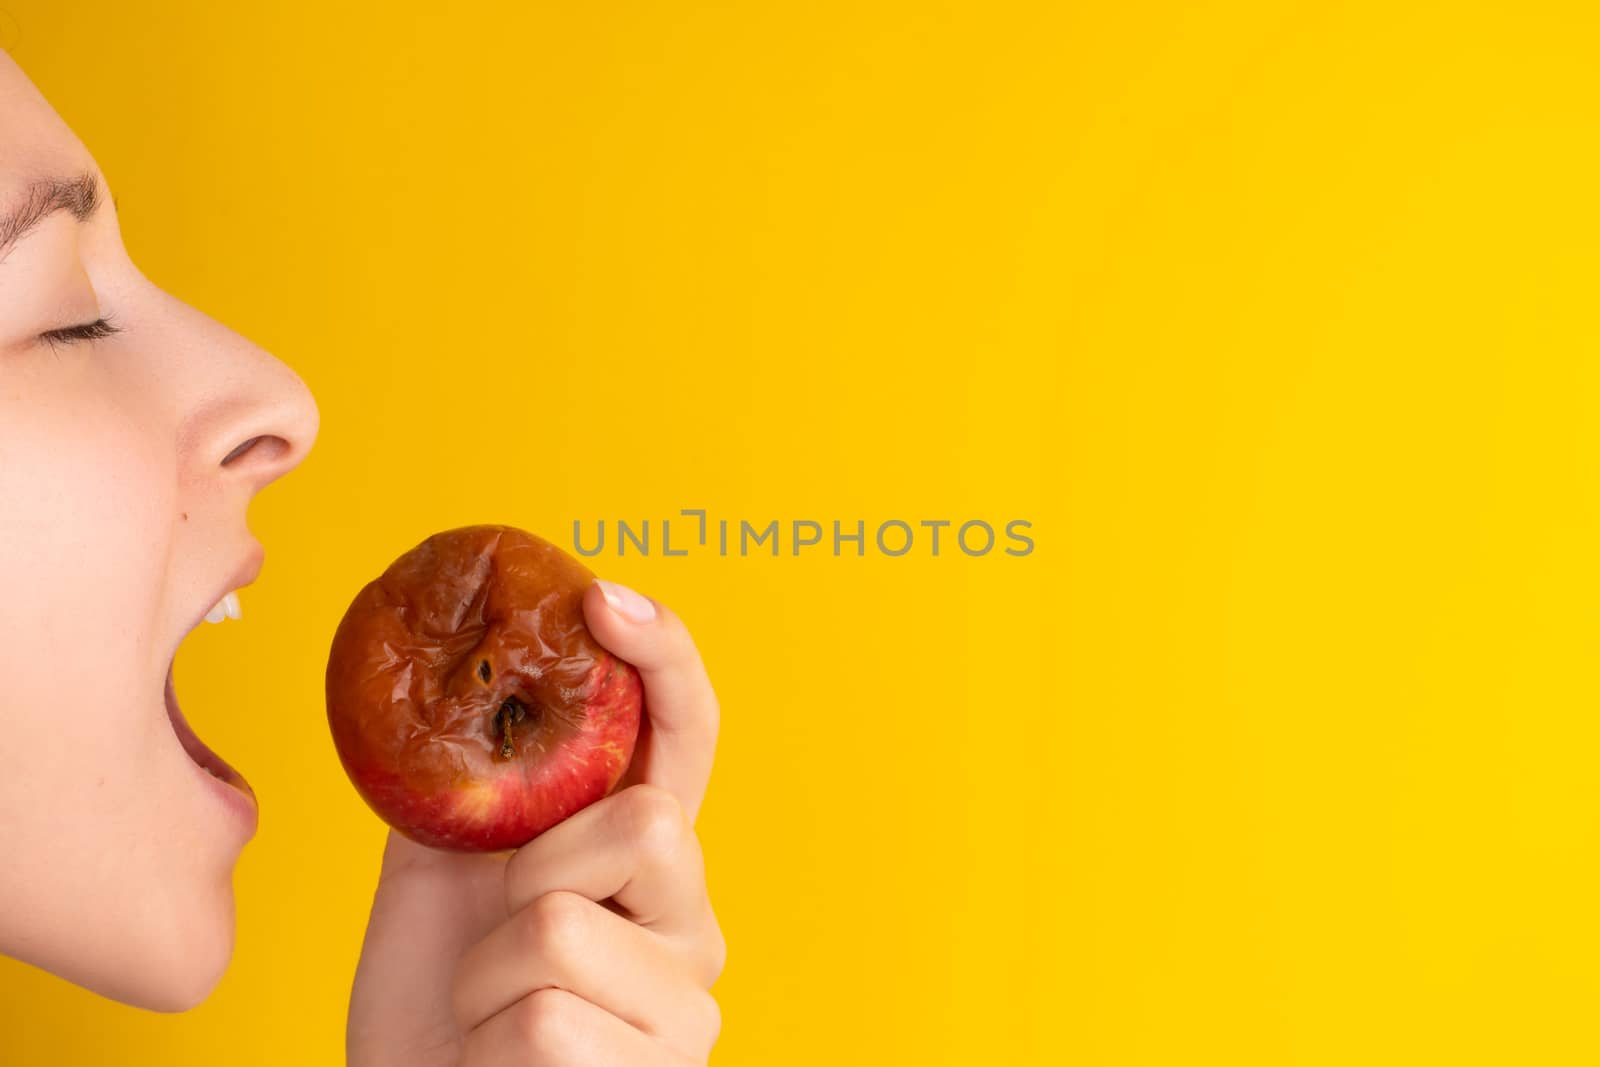 The girl bites a rotten apple with a worm on a yellow background. Expired products, junk food.